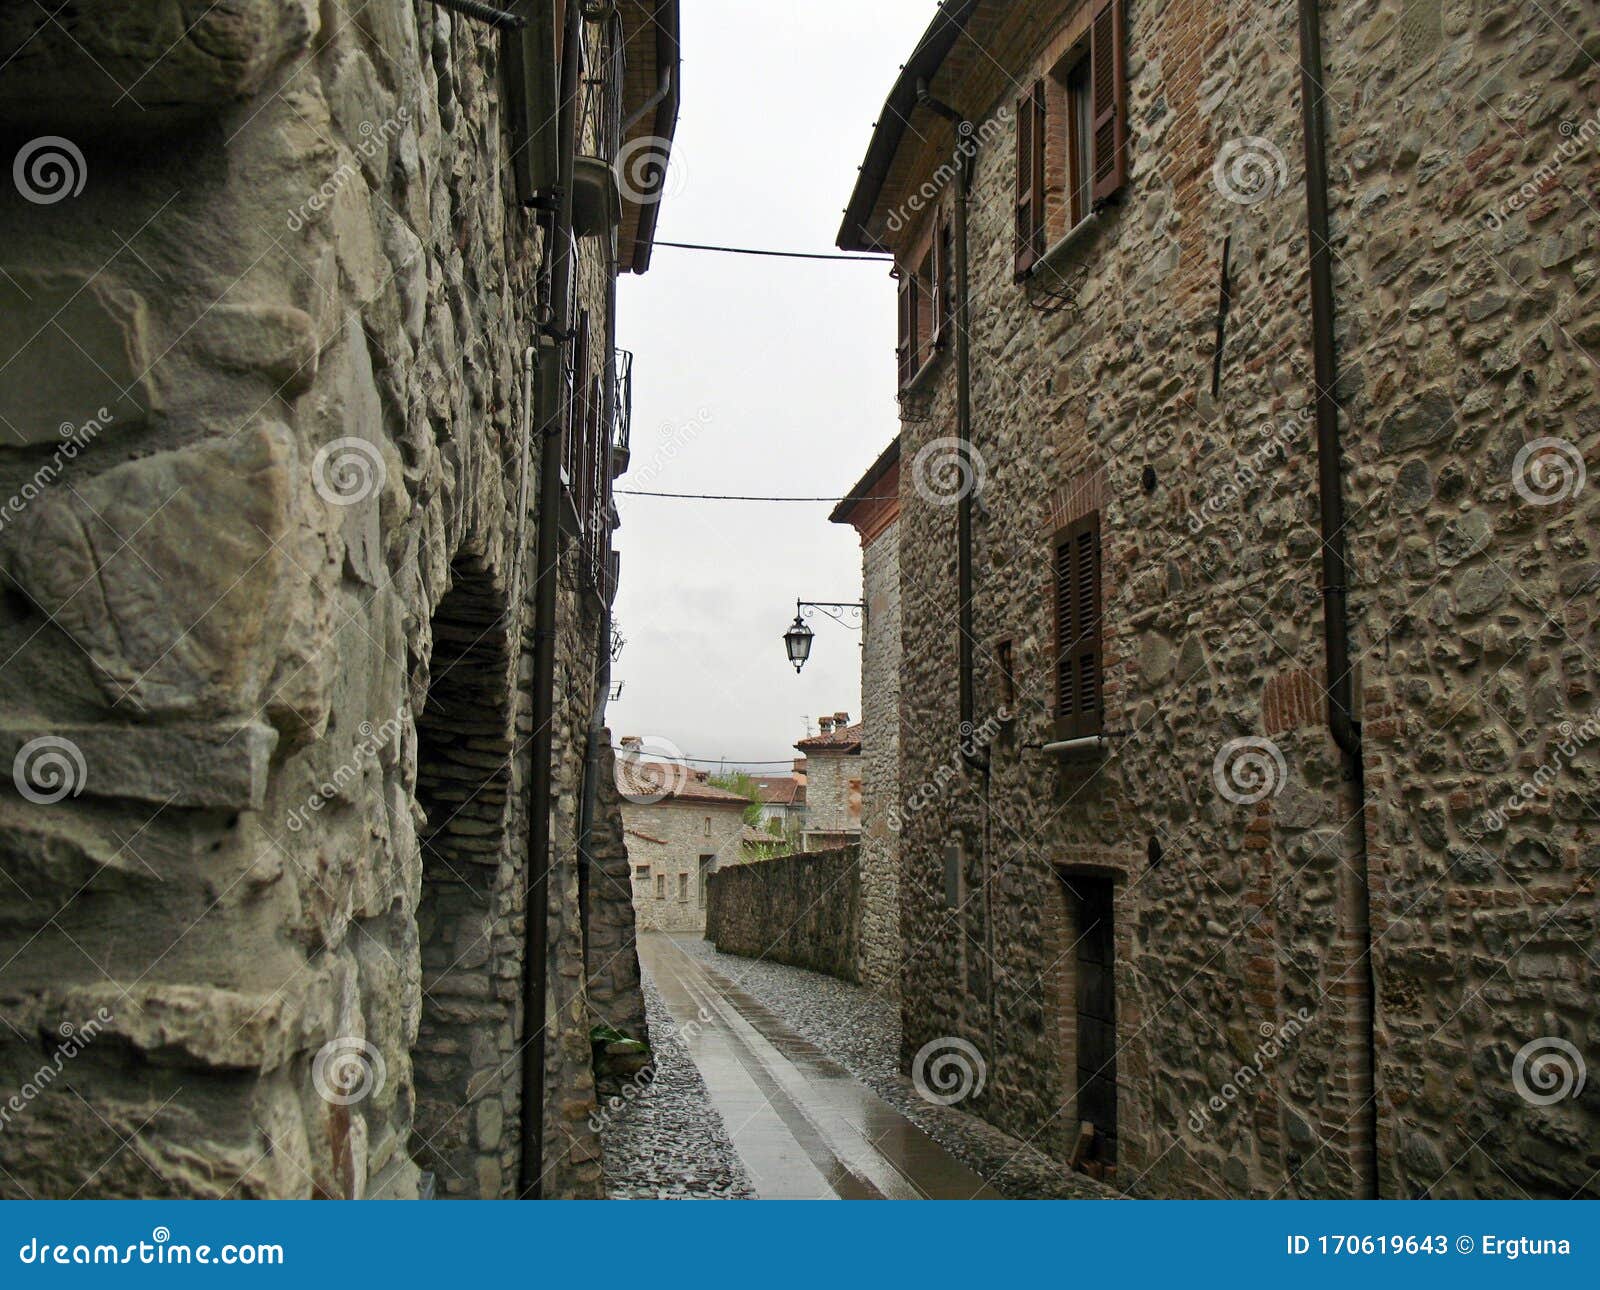 alleys of bobbio, province of piacenza in emilia-romagna, northern italy